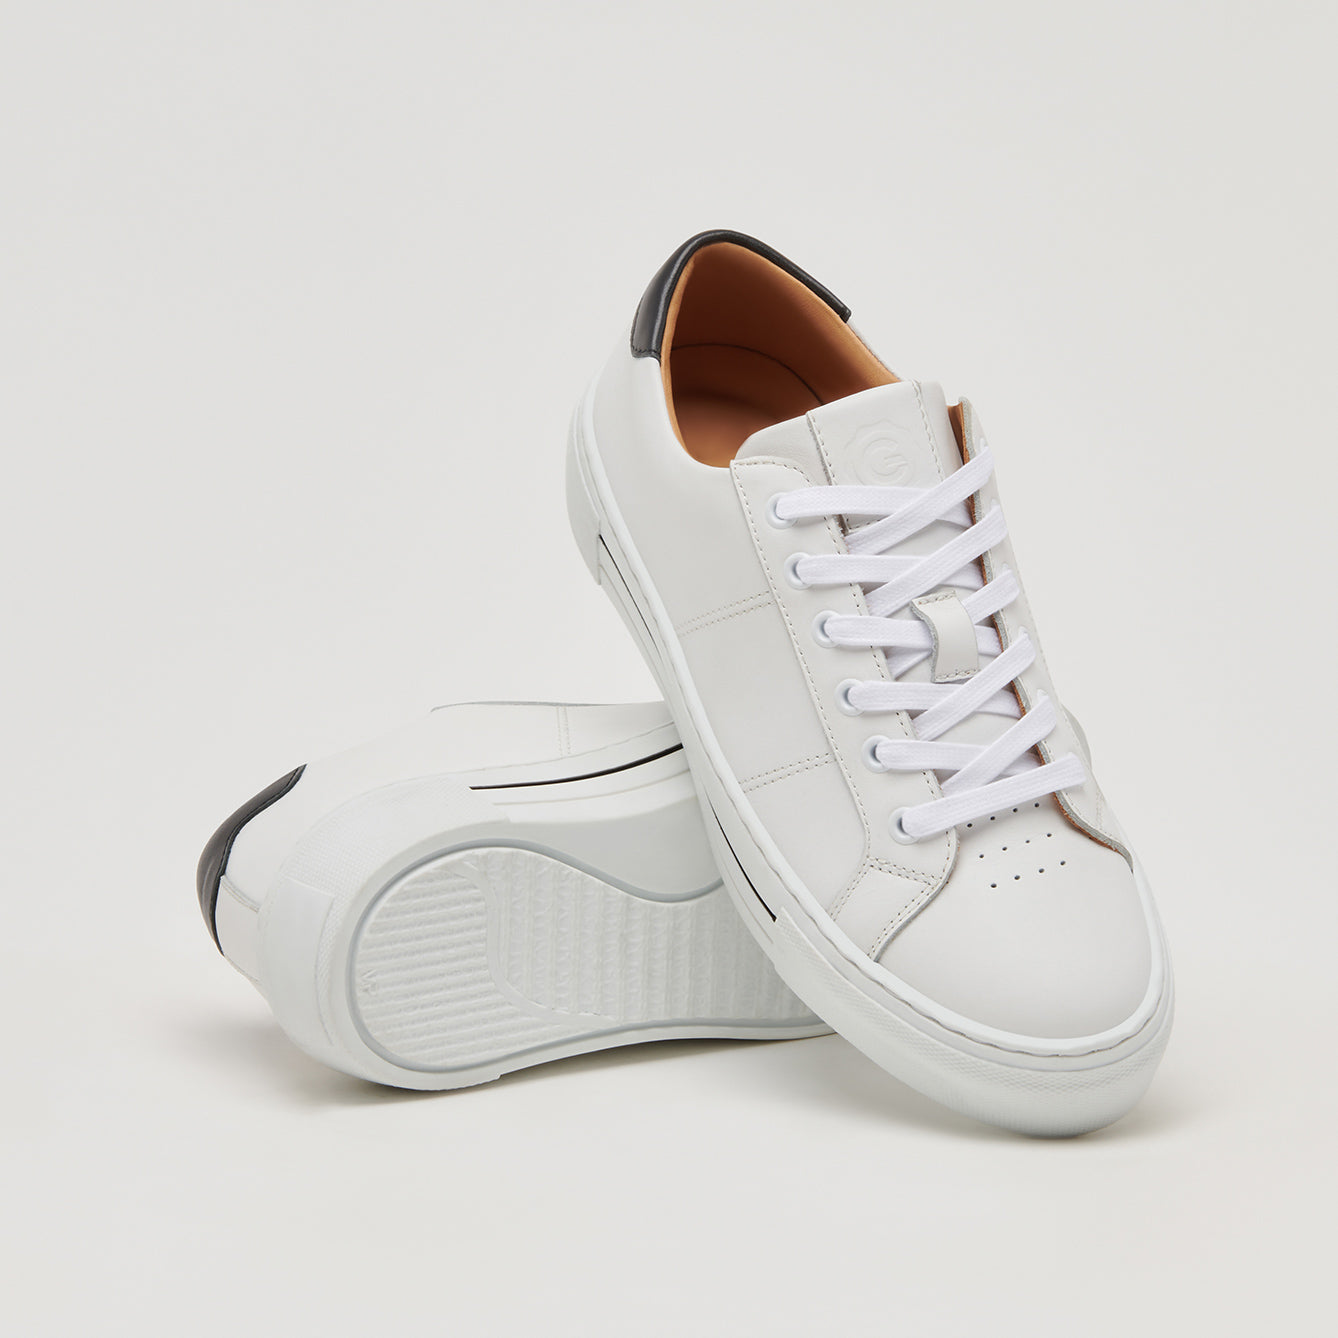 Ijsbeer opgraven Bourgondië Premium Sneakers. Free Shipping On All Orders – GREATS